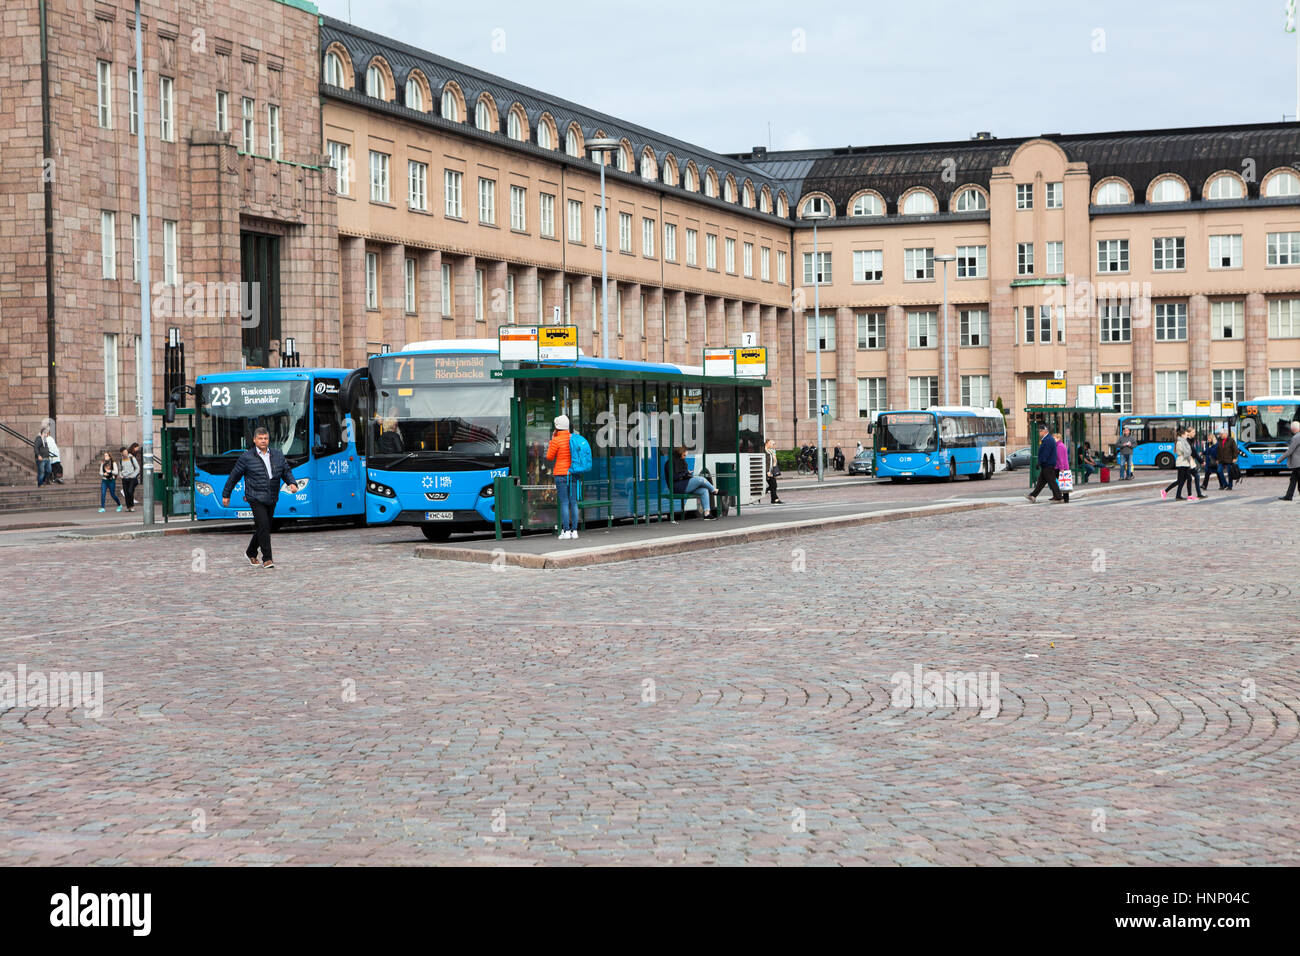 HELSINKI, FINLAND - CIRCA SEP, 2016: There are many platforms for regular bus lines on the main station. Internal bus routes start in the Rautatientor Stock Photo